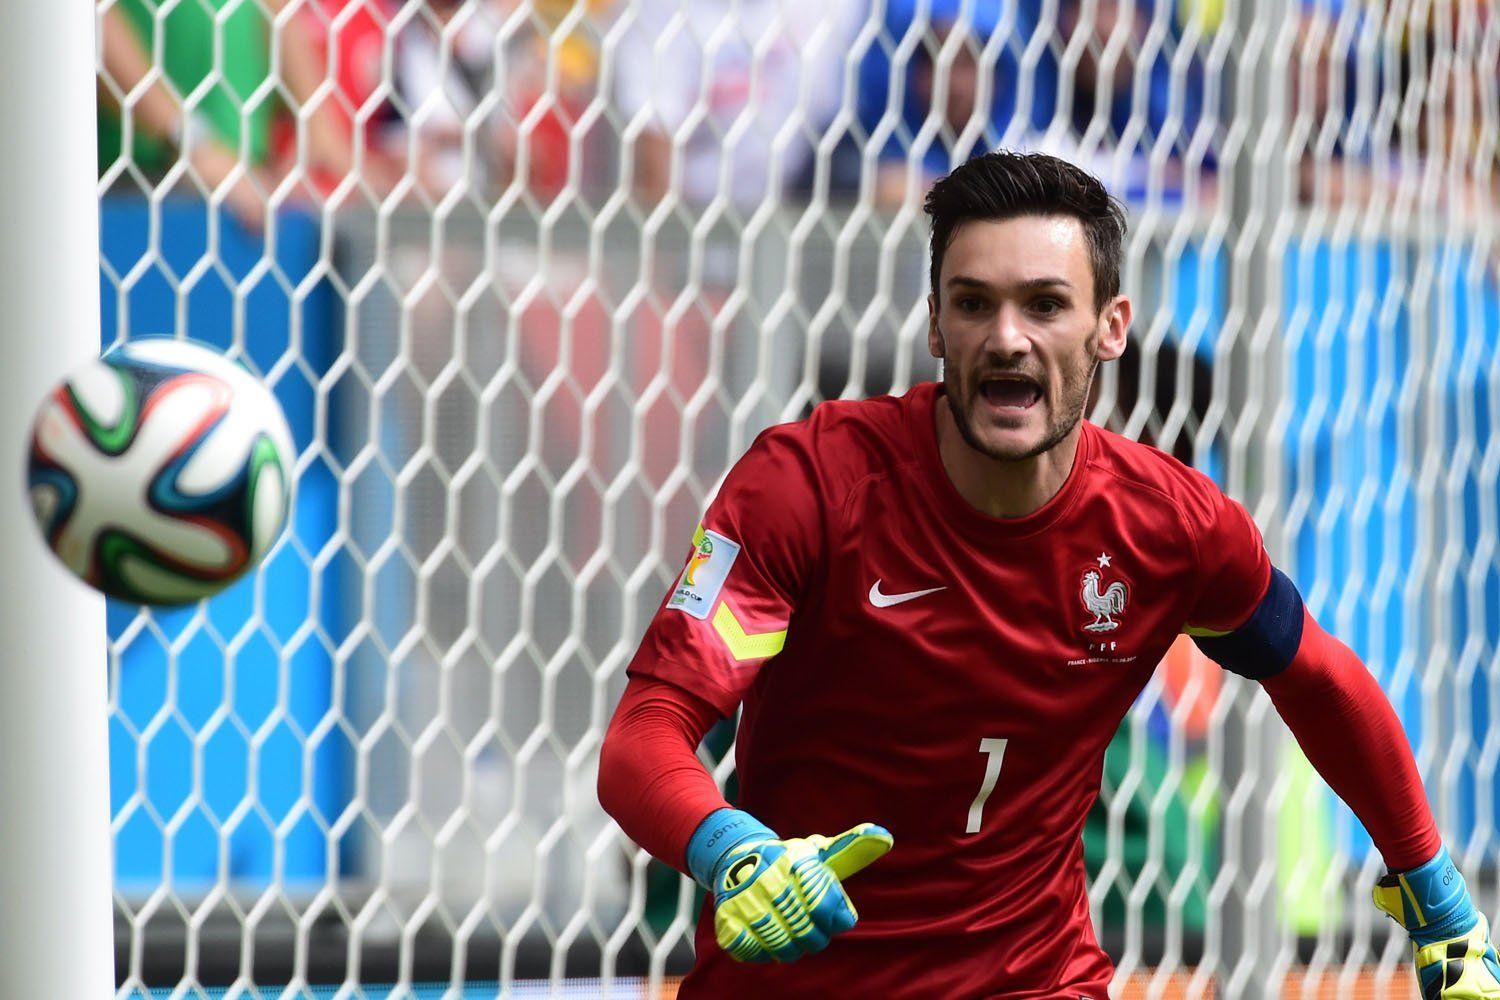 Tottenham's Hugo Lloris will go down as one of the greats of